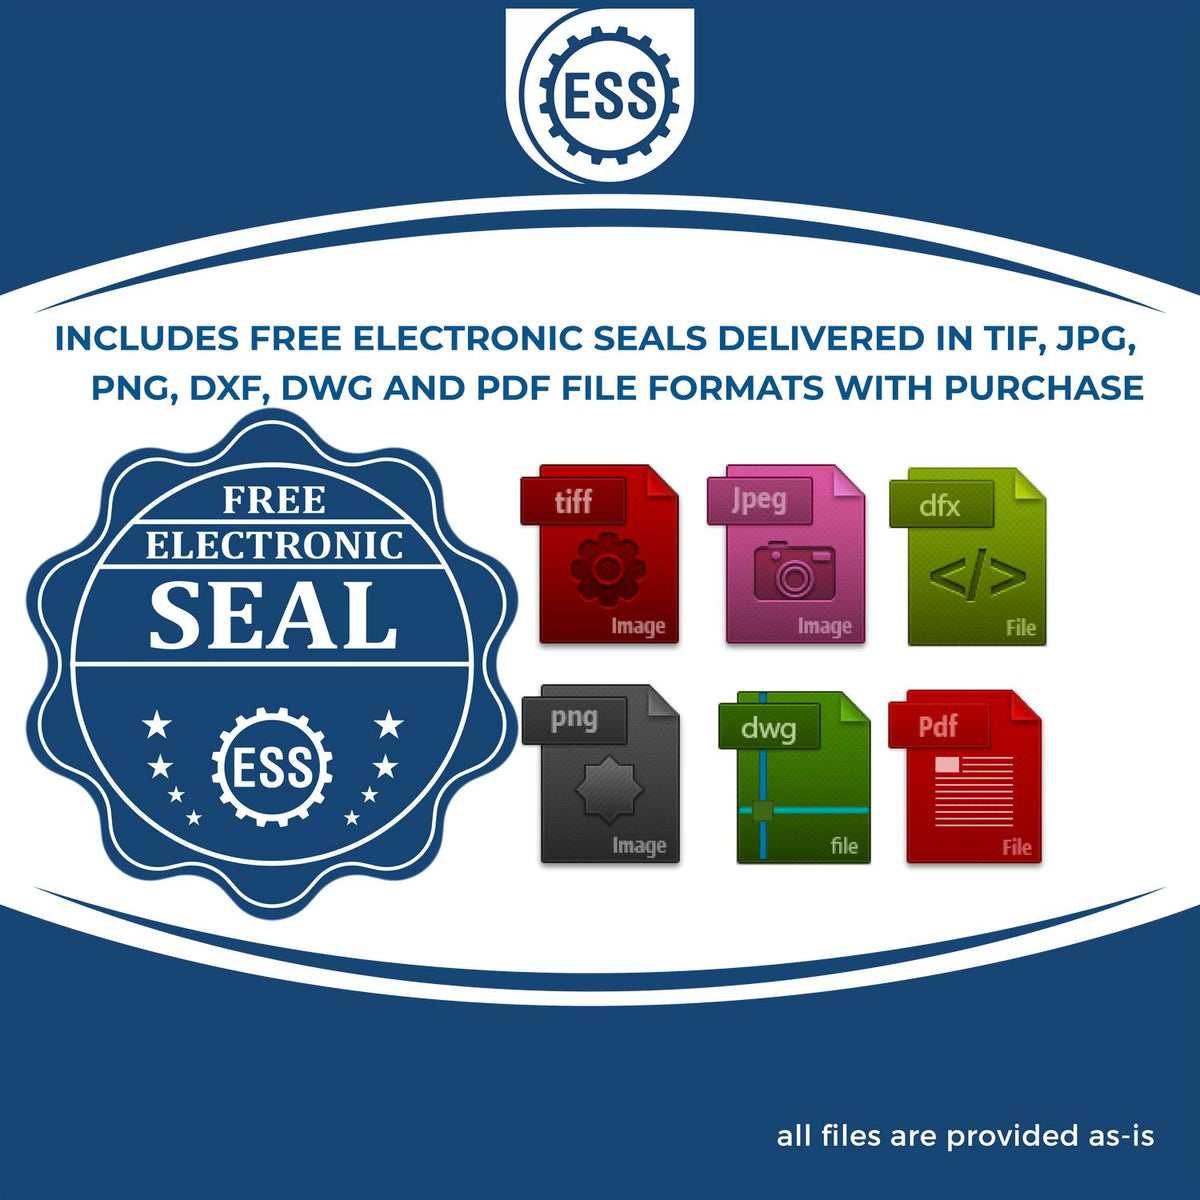 An infographic for the free electronic seal for the Long Reach New Jersey Geology Seal illustrating the different file type icons such as DXF, DWG, TIF, JPG and PNG.